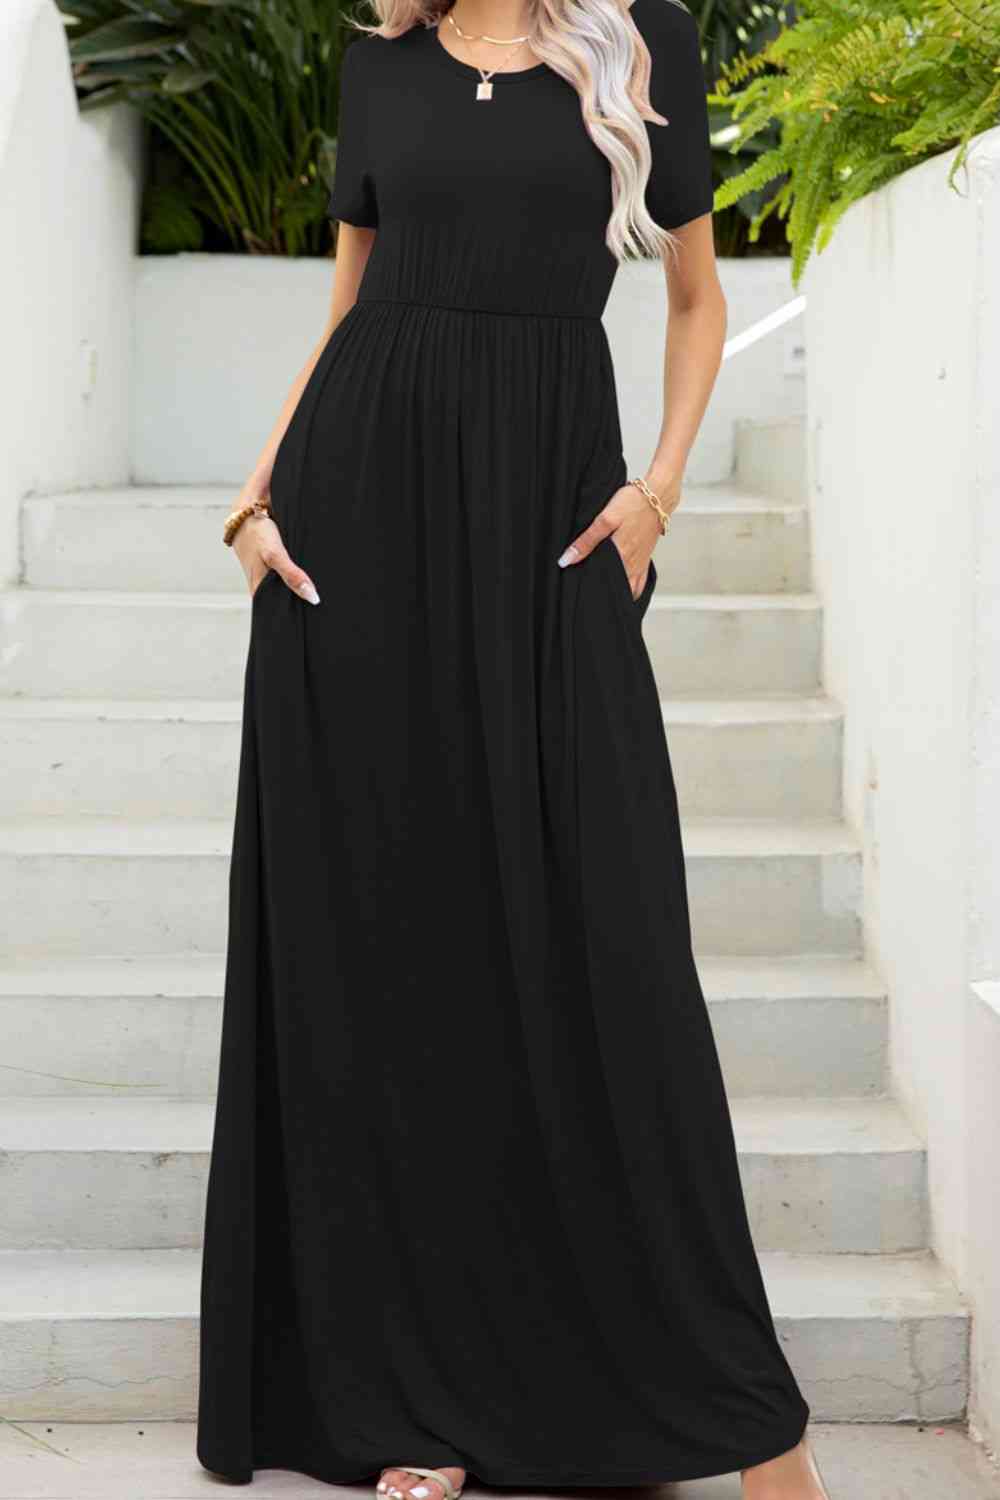 3 Colors - Round Neck Maxi Tee Dress with Pockets - Sizes S-2XL Ti Amo I love you